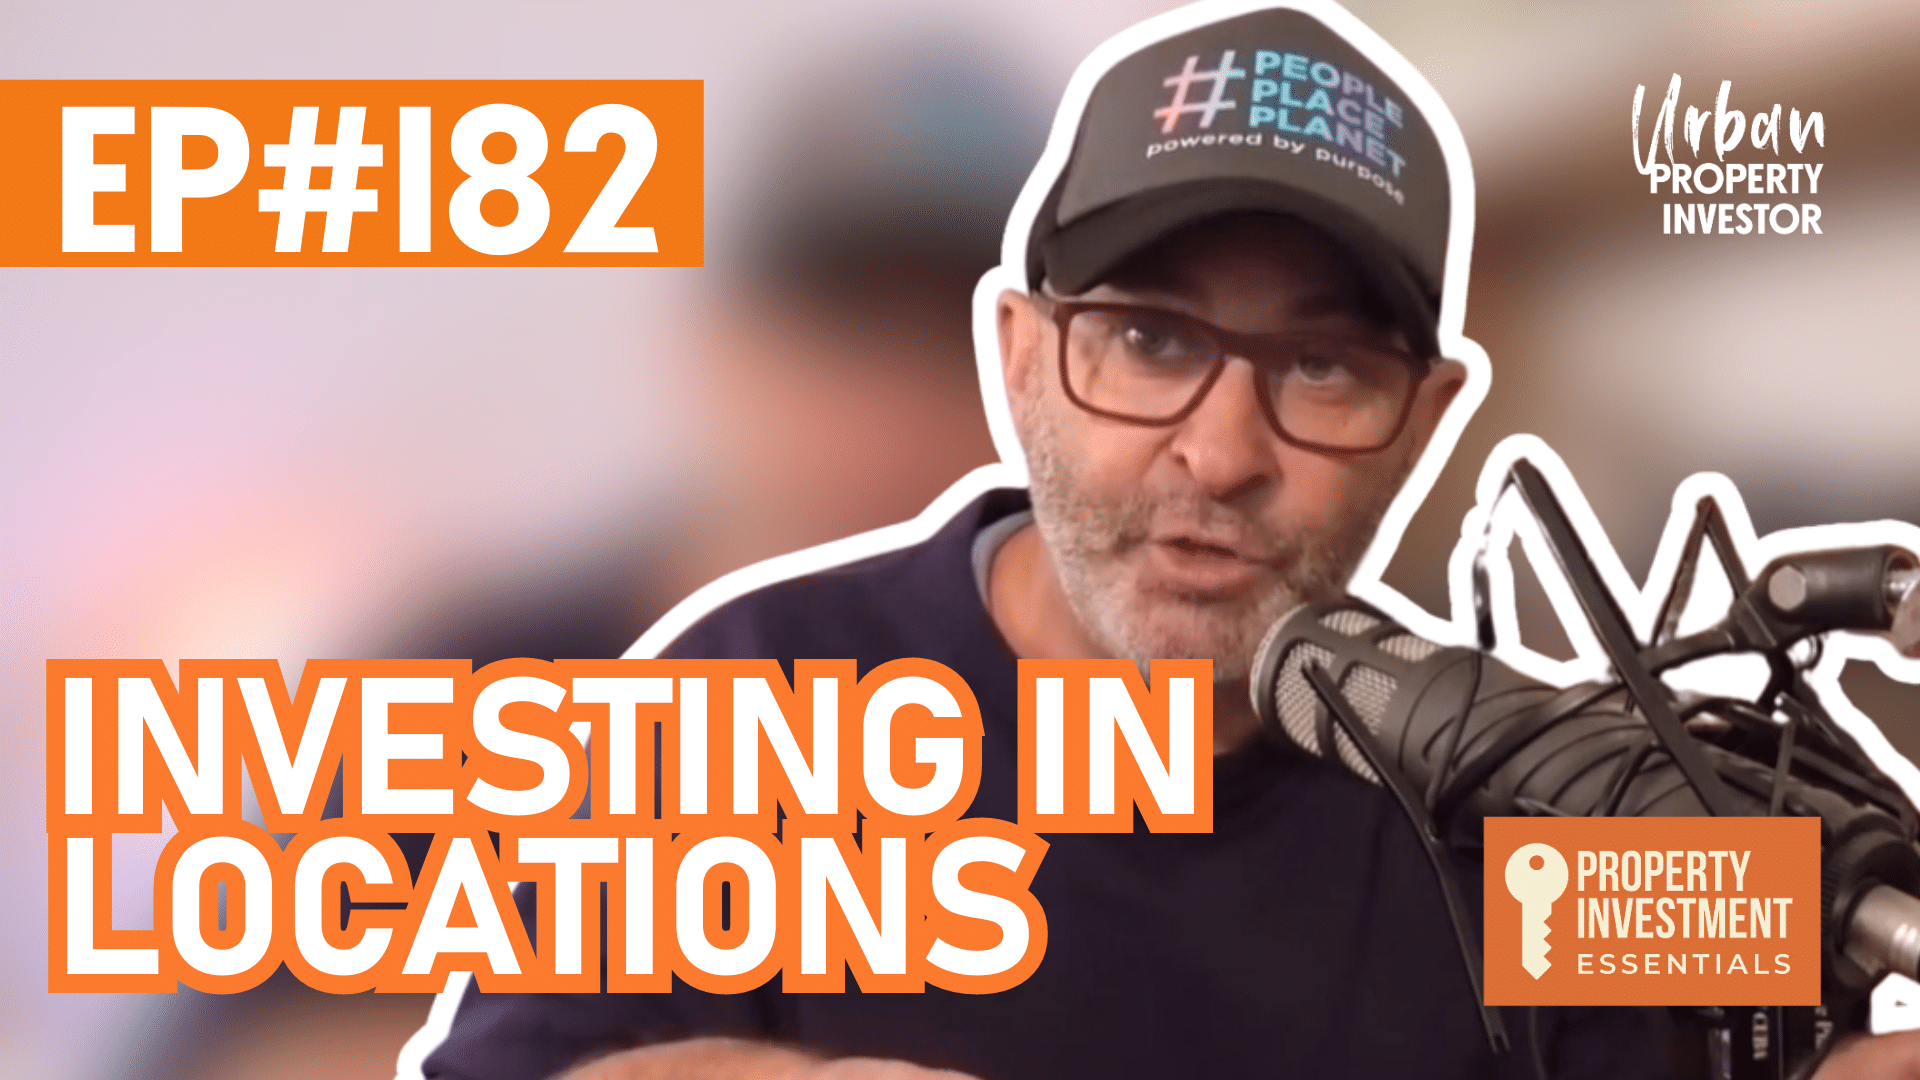 Best Of – Ep143 – Investing in Locations